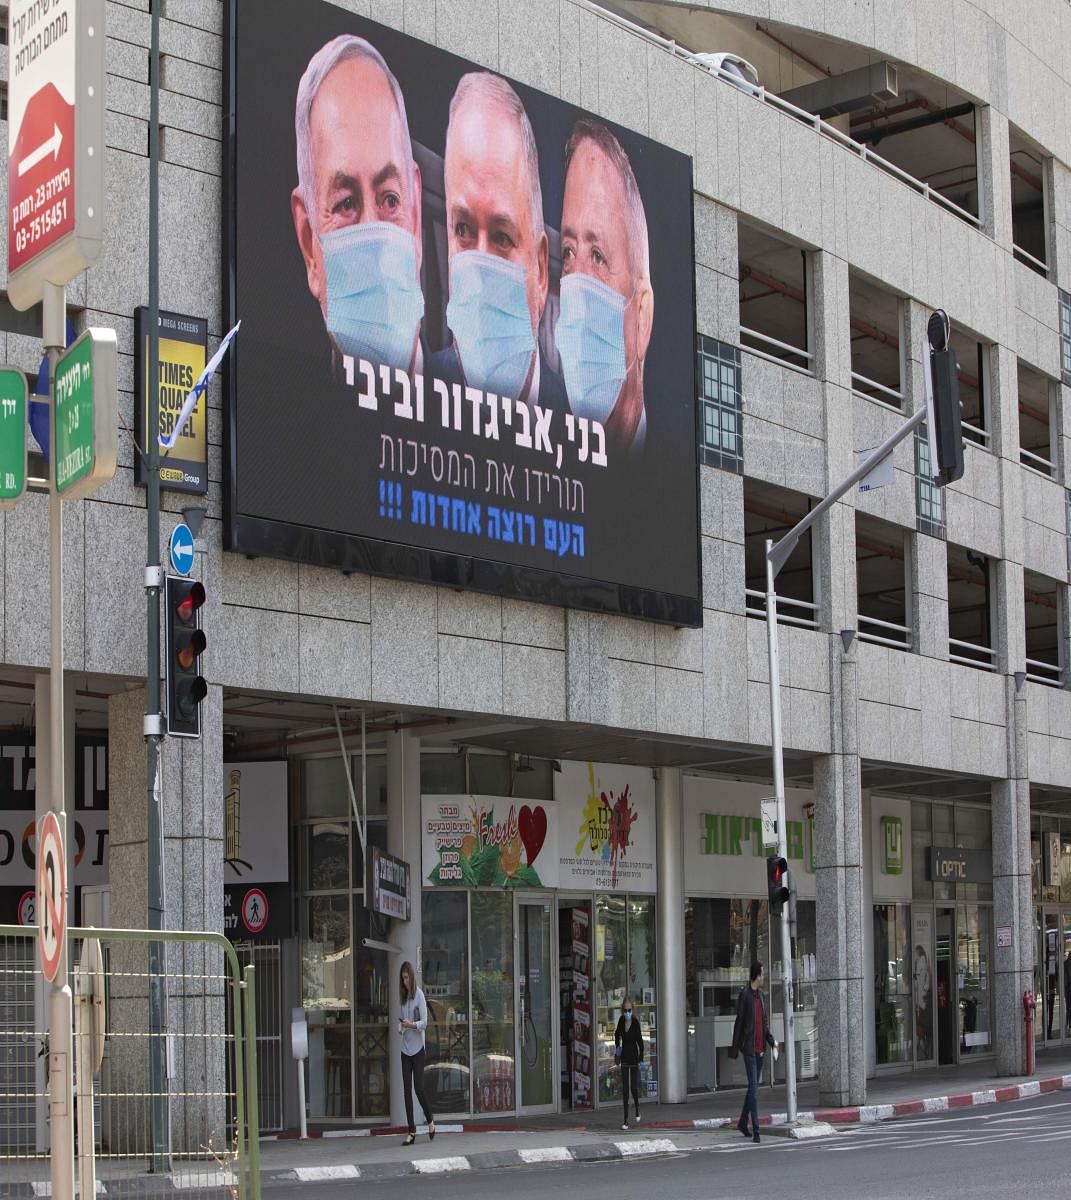 A billboard shows Israeli Prime Minister Benjamin Netanyahu, left, Israeli Former Defense Minister and leader of the Yisrael Beiteinu (Israel Our Home) right-wing party Avigdor Lieberman, center, and Blue and White party leader Benny Gantz, wearing masks in the Israeli city of Ramat Gan, near Tel Aviv. (AFP Photo)